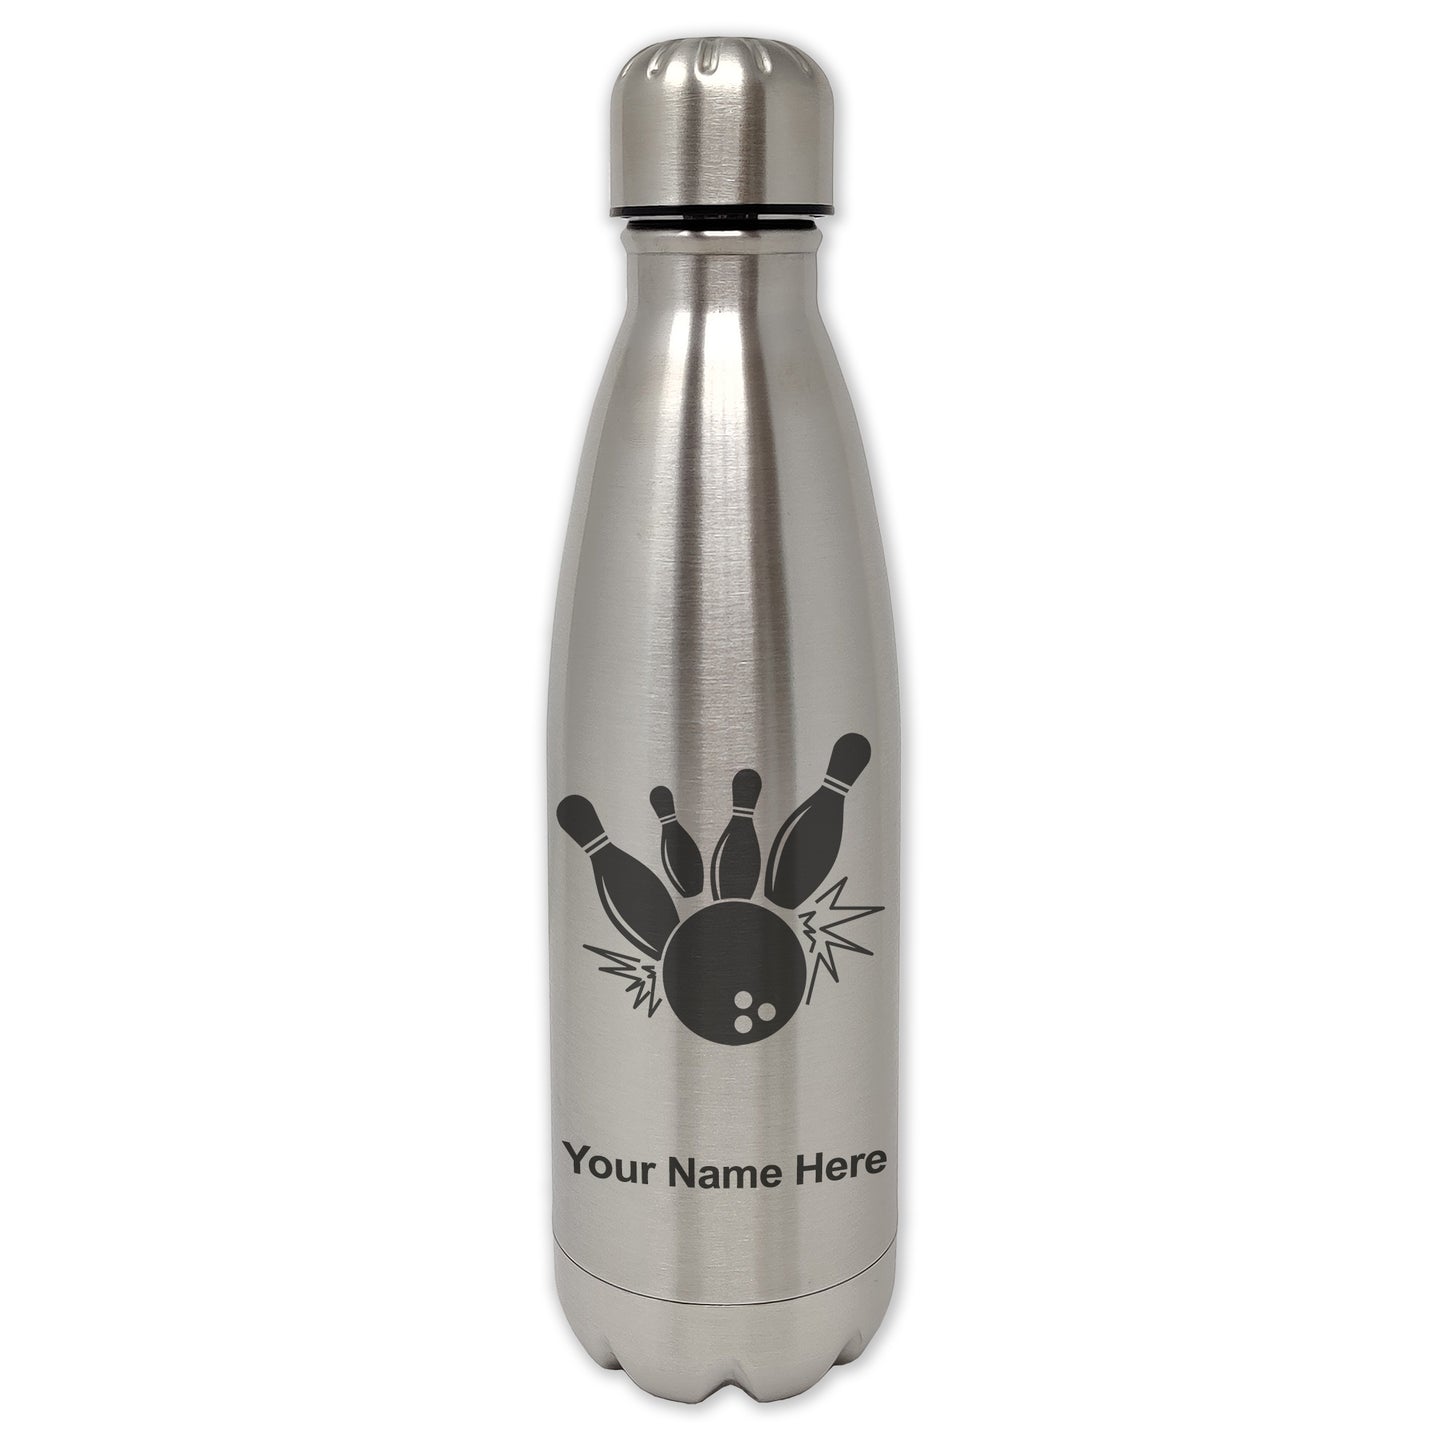 LaserGram Double Wall Water Bottle, Bowling Ball and Pins, Personalized Engraving Included